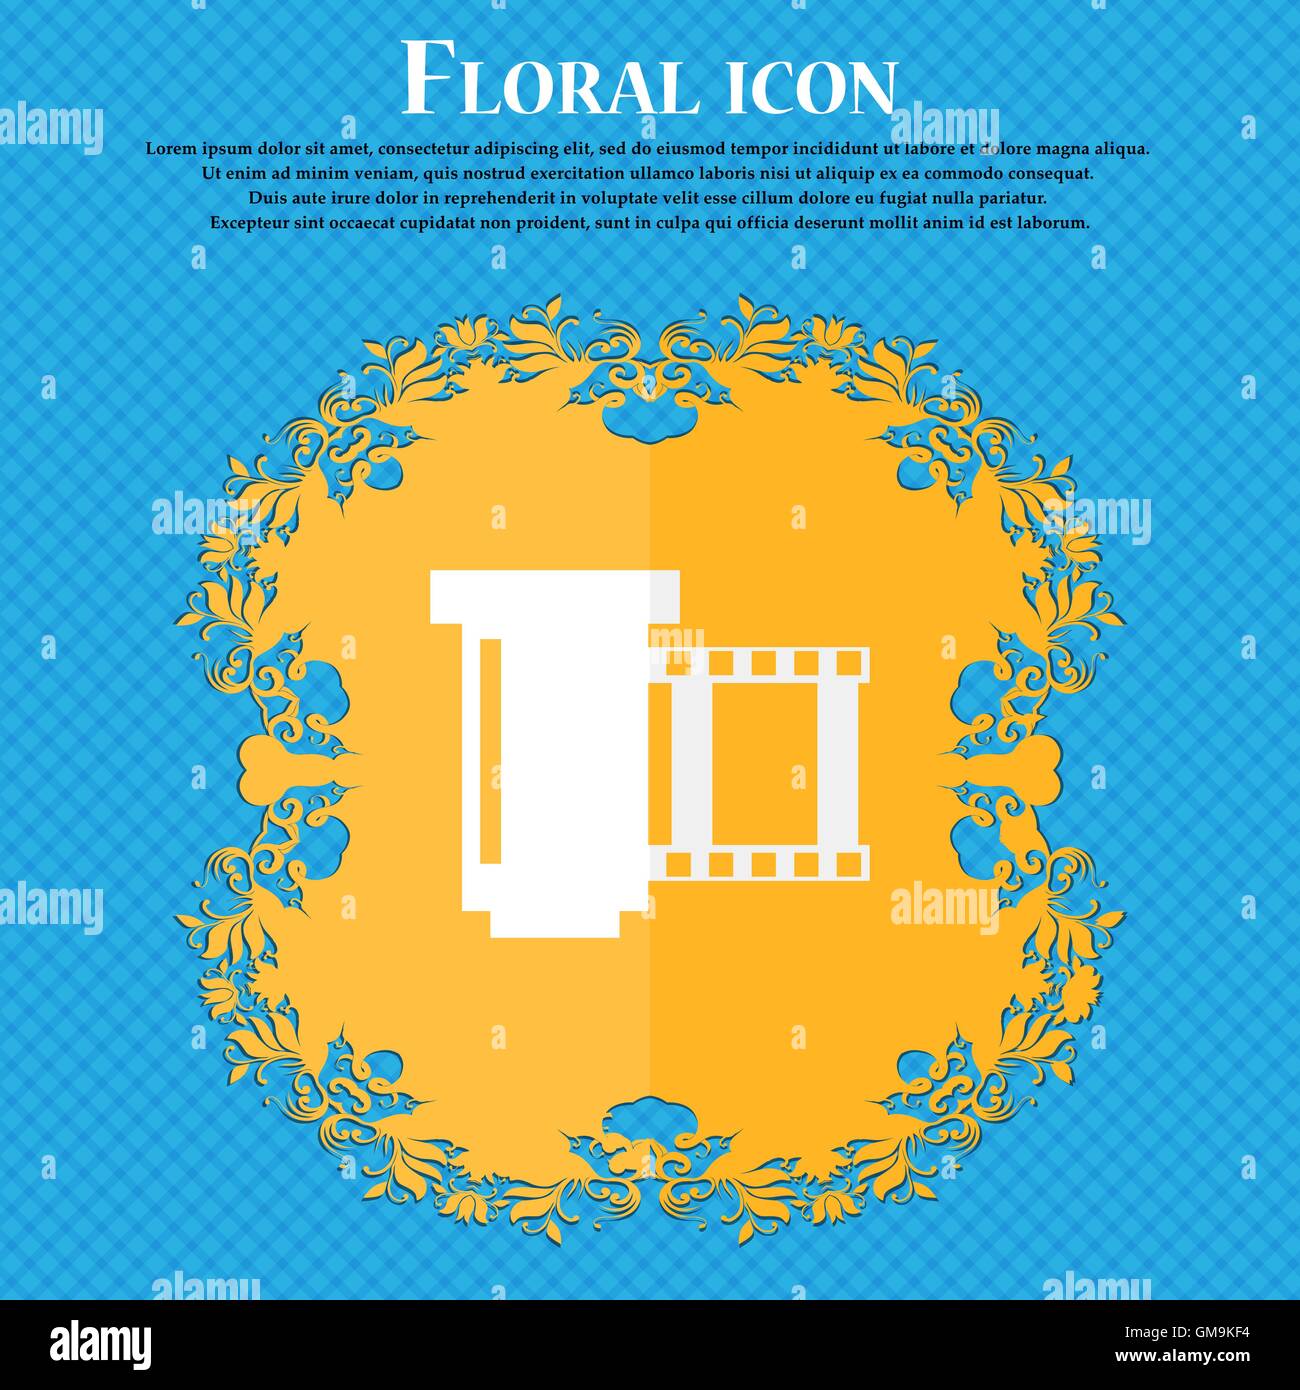 negative films icon symbol. Floral flat design on a blue abstract background with place for your text. Vector Stock Vector